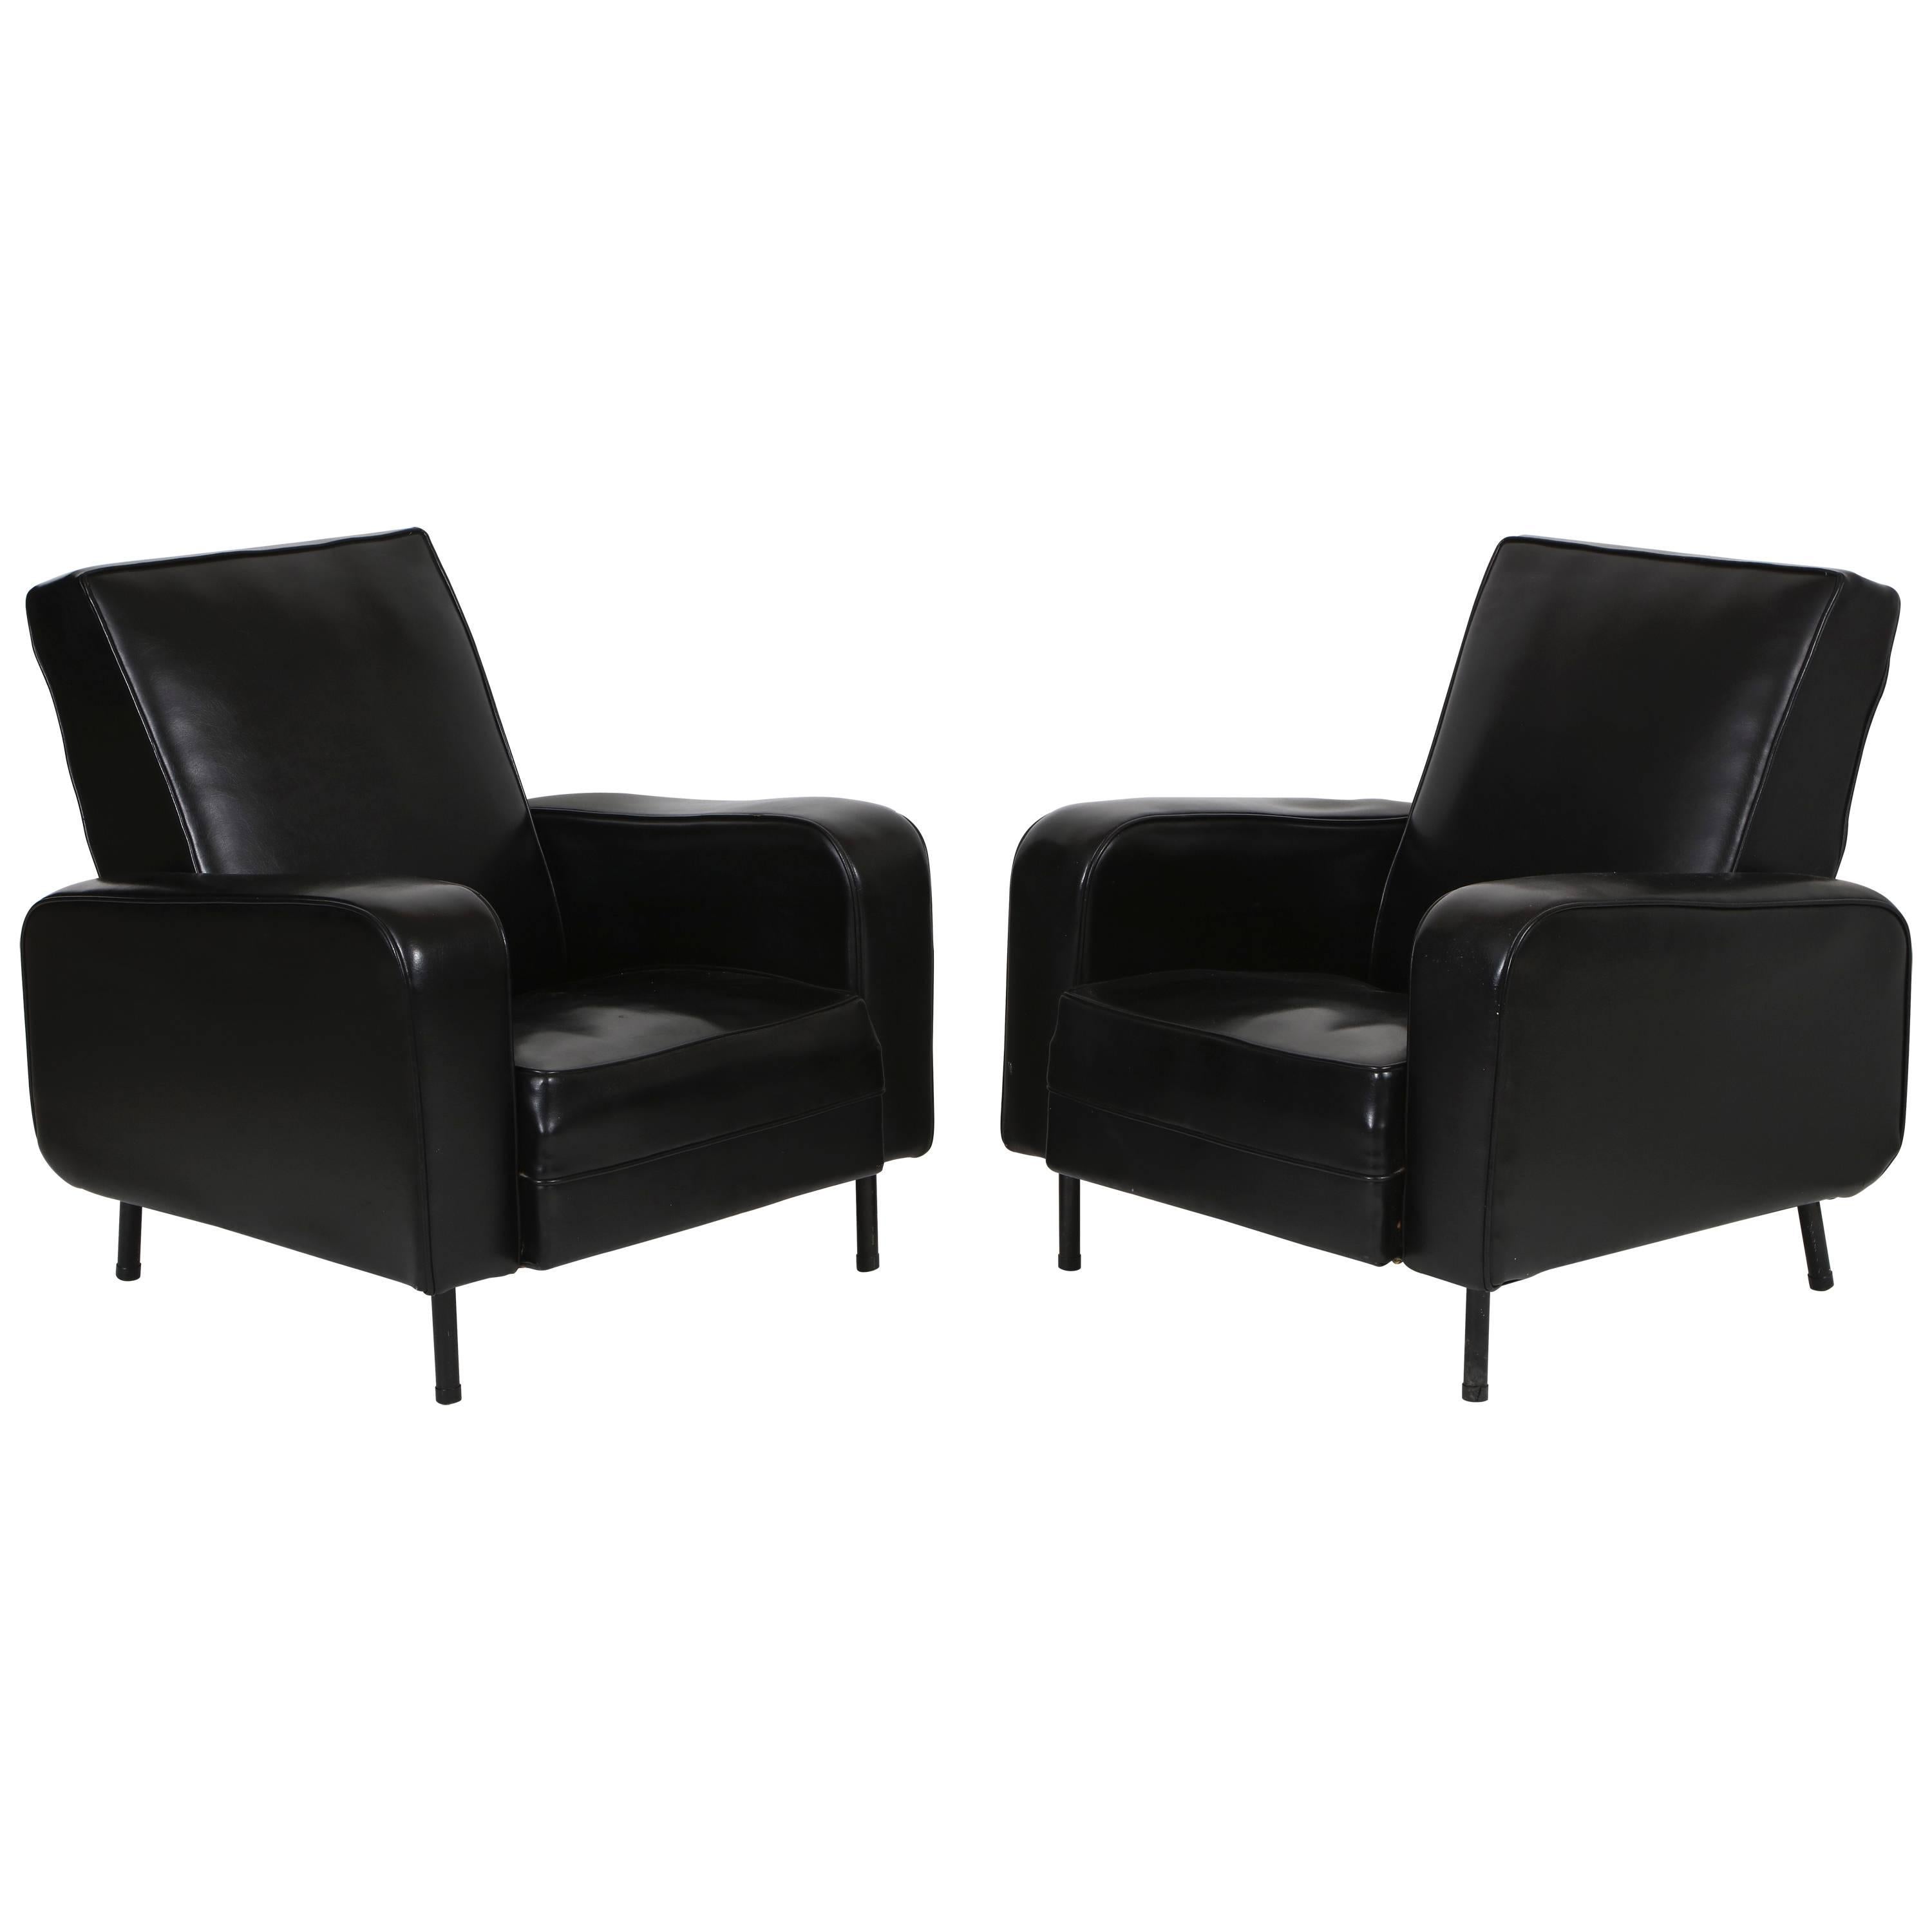 Guariche Attributed Airborne Chairs 1950s black faux leather lounge Mid-Century, France.

Deep and comfortable chic black lounge chairs. Original vintage condition.

Height: 34 inches.
Depth: 27 inches.
Width: 29 inches.
Seat height: 15